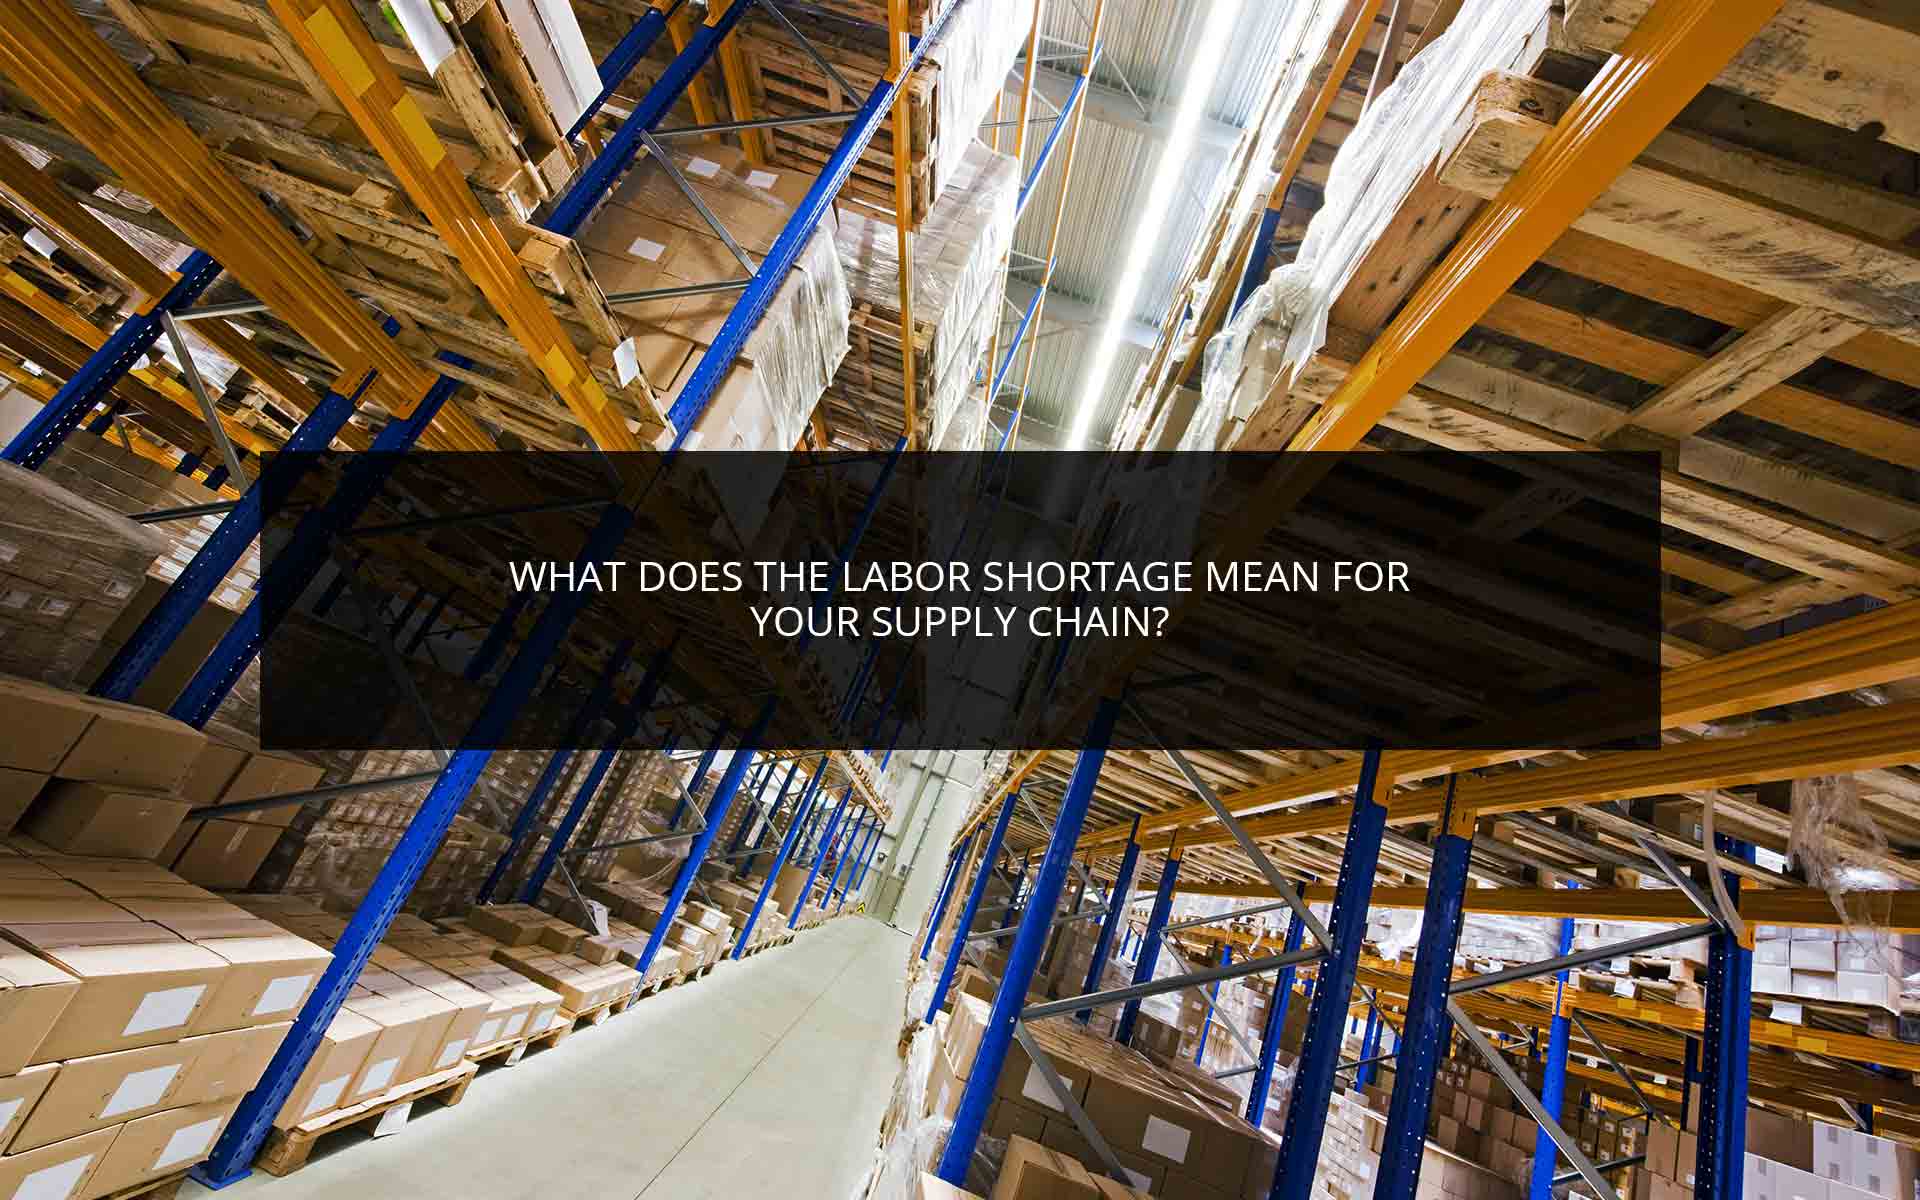 What Does the Labor Shortage Mean for Your Supply Chain? | Phoenix Investors